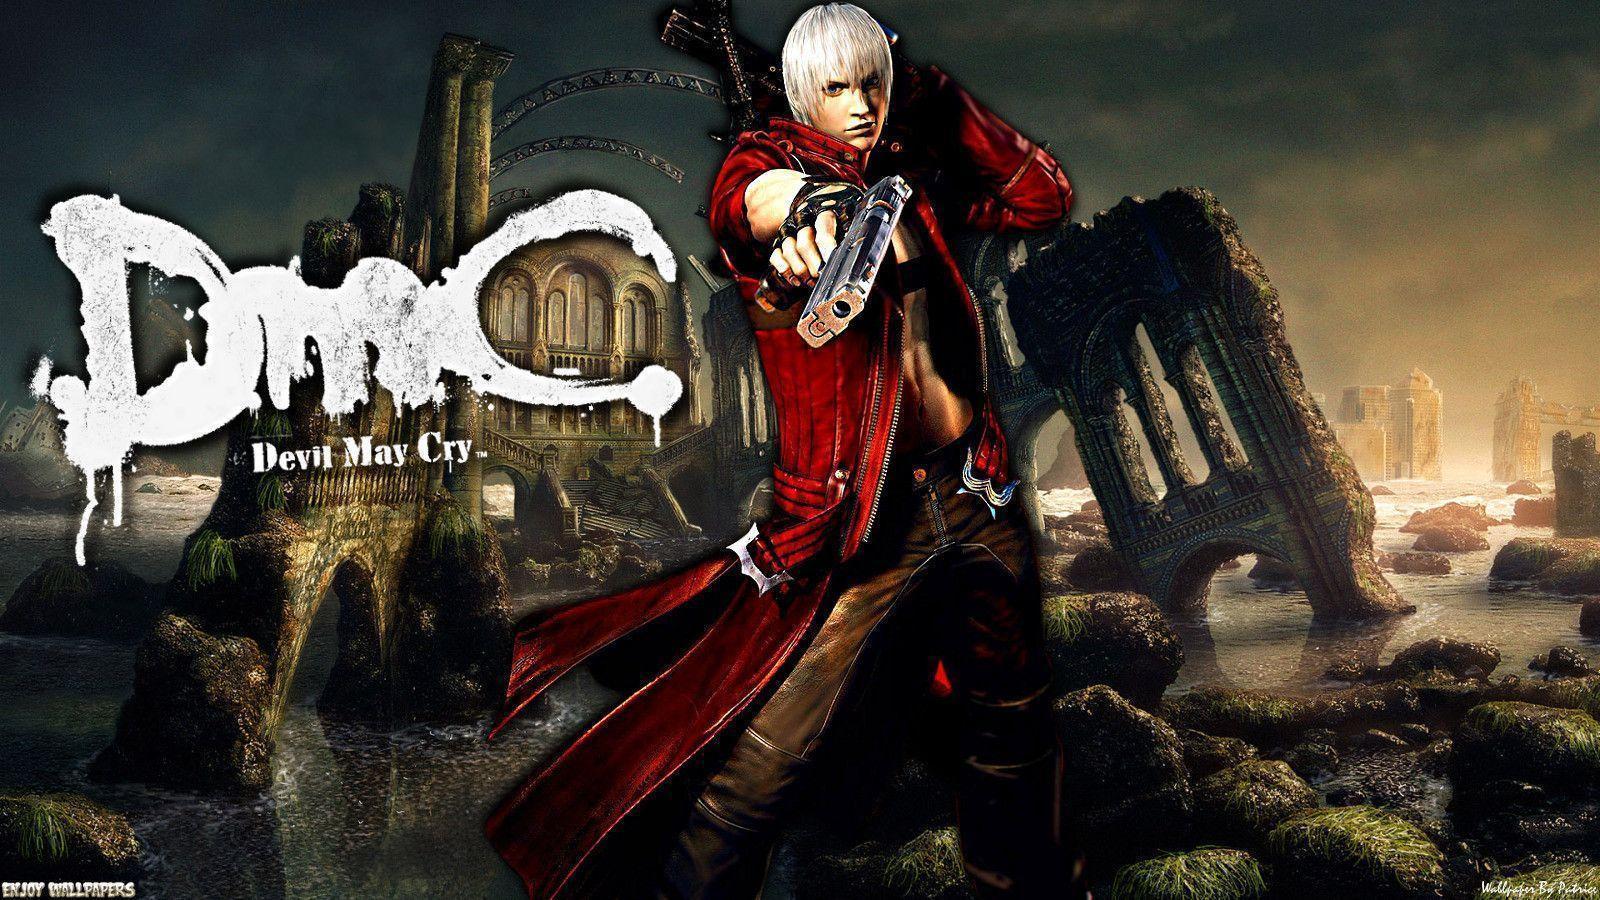 Devil May Cry: DMC Wallpaper for all DMC's fans